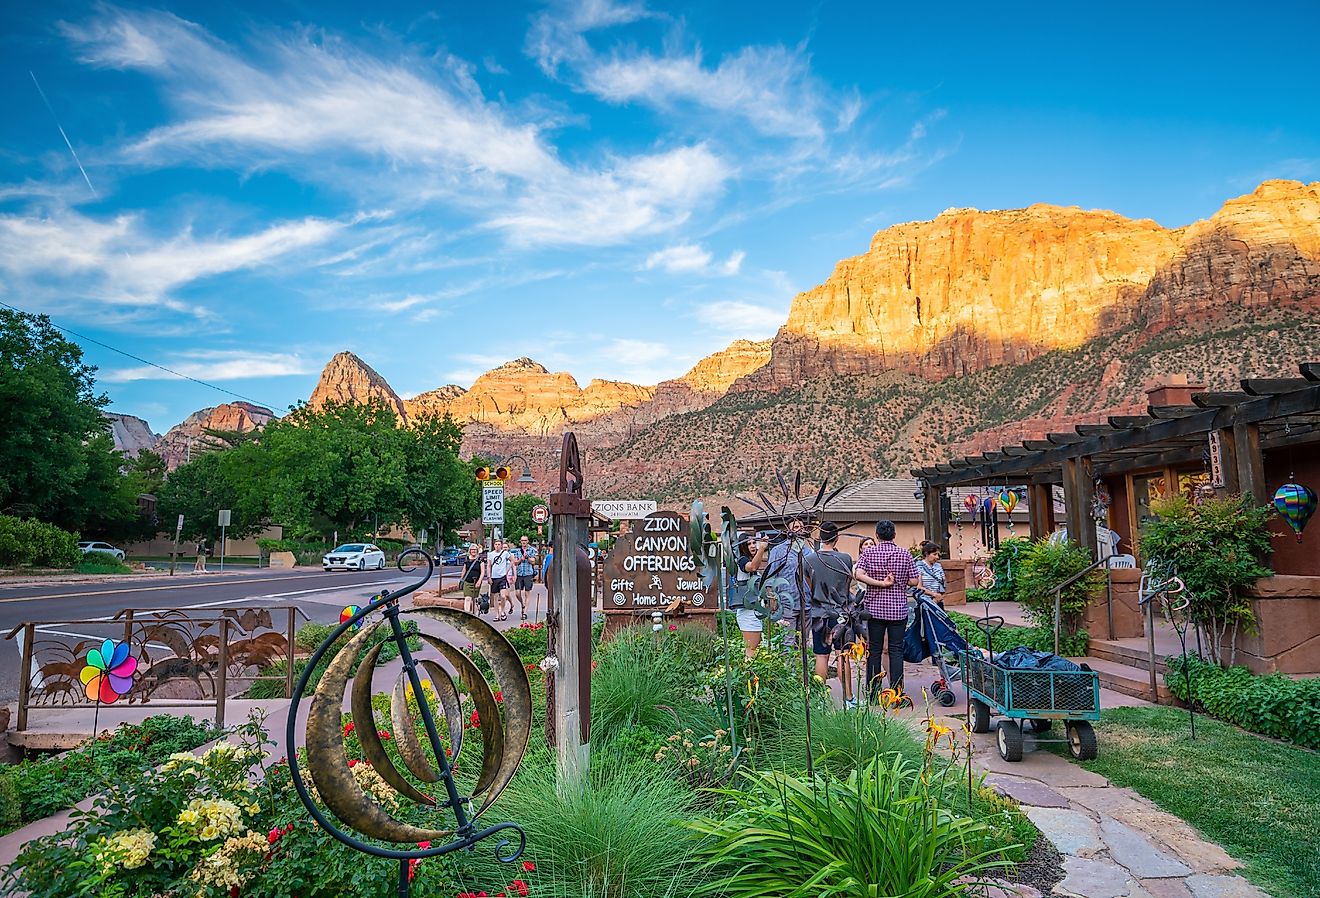 Friendly locals and tourists in downtown Springdale, Utah. Image credit f11 via Shutterstock